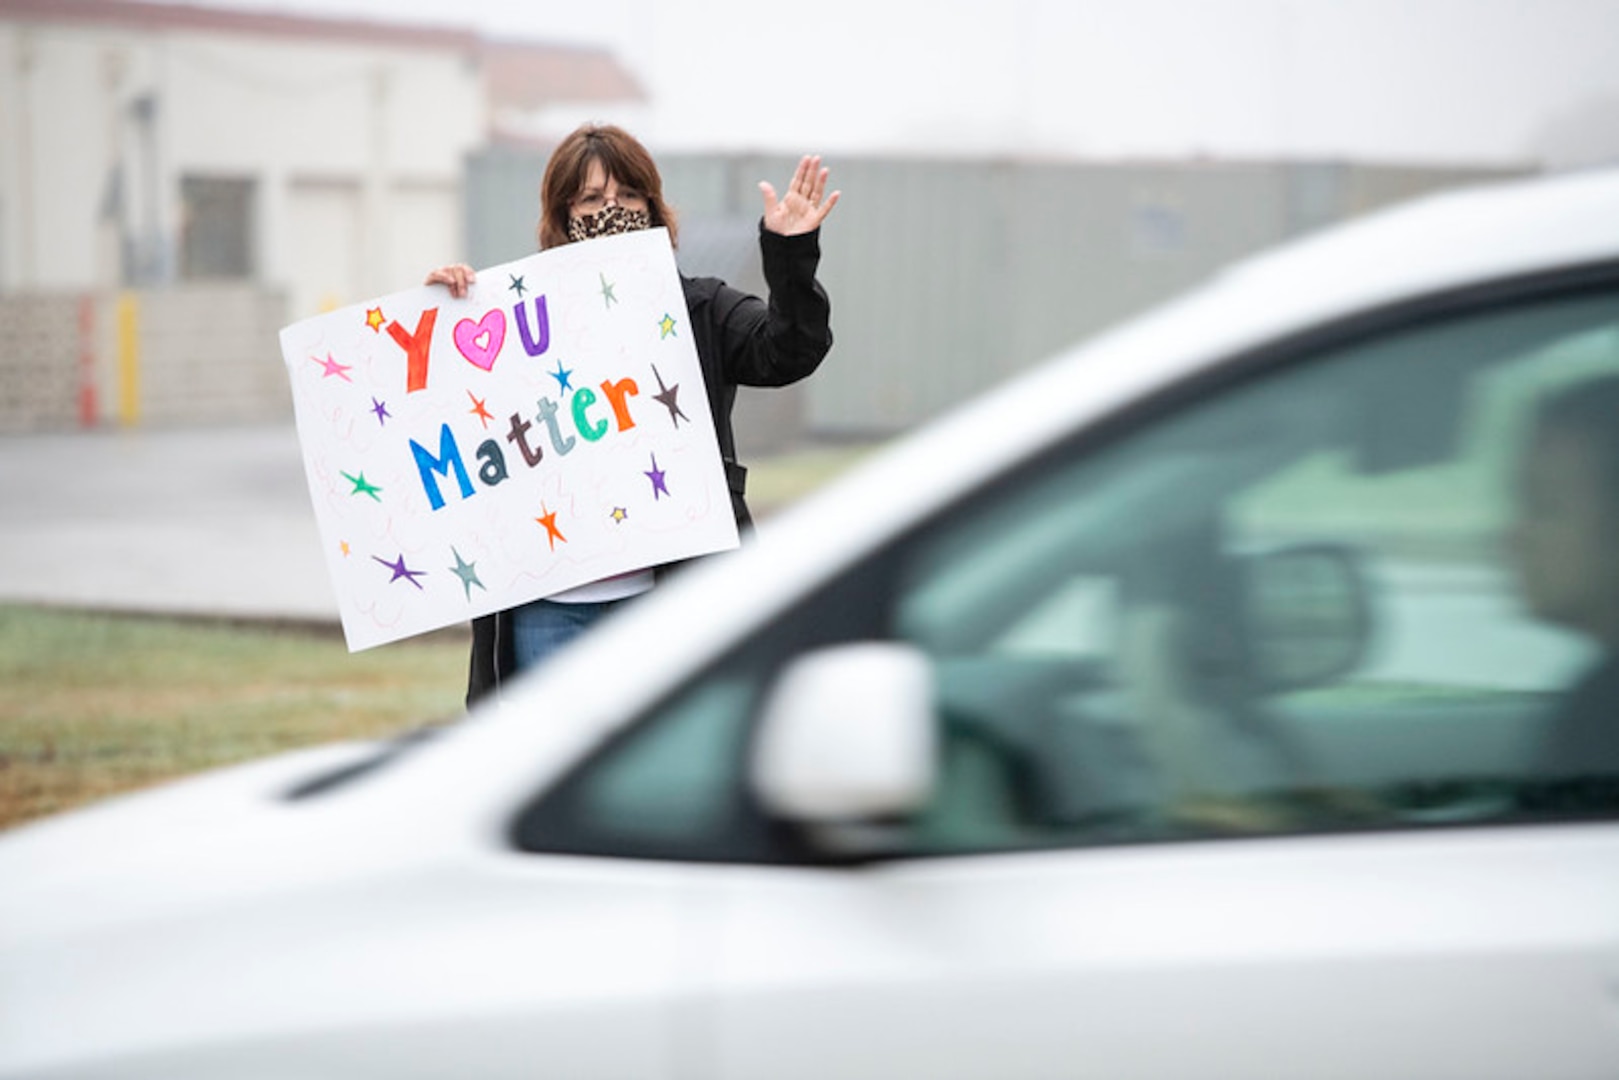 Volunteers hold signs in support of the We Care Day event April. 16, 2021, at Joint Base San Antonio-Randolph, Texas. The event was in support of Month of the Military Child and Child Abuse awareness month.